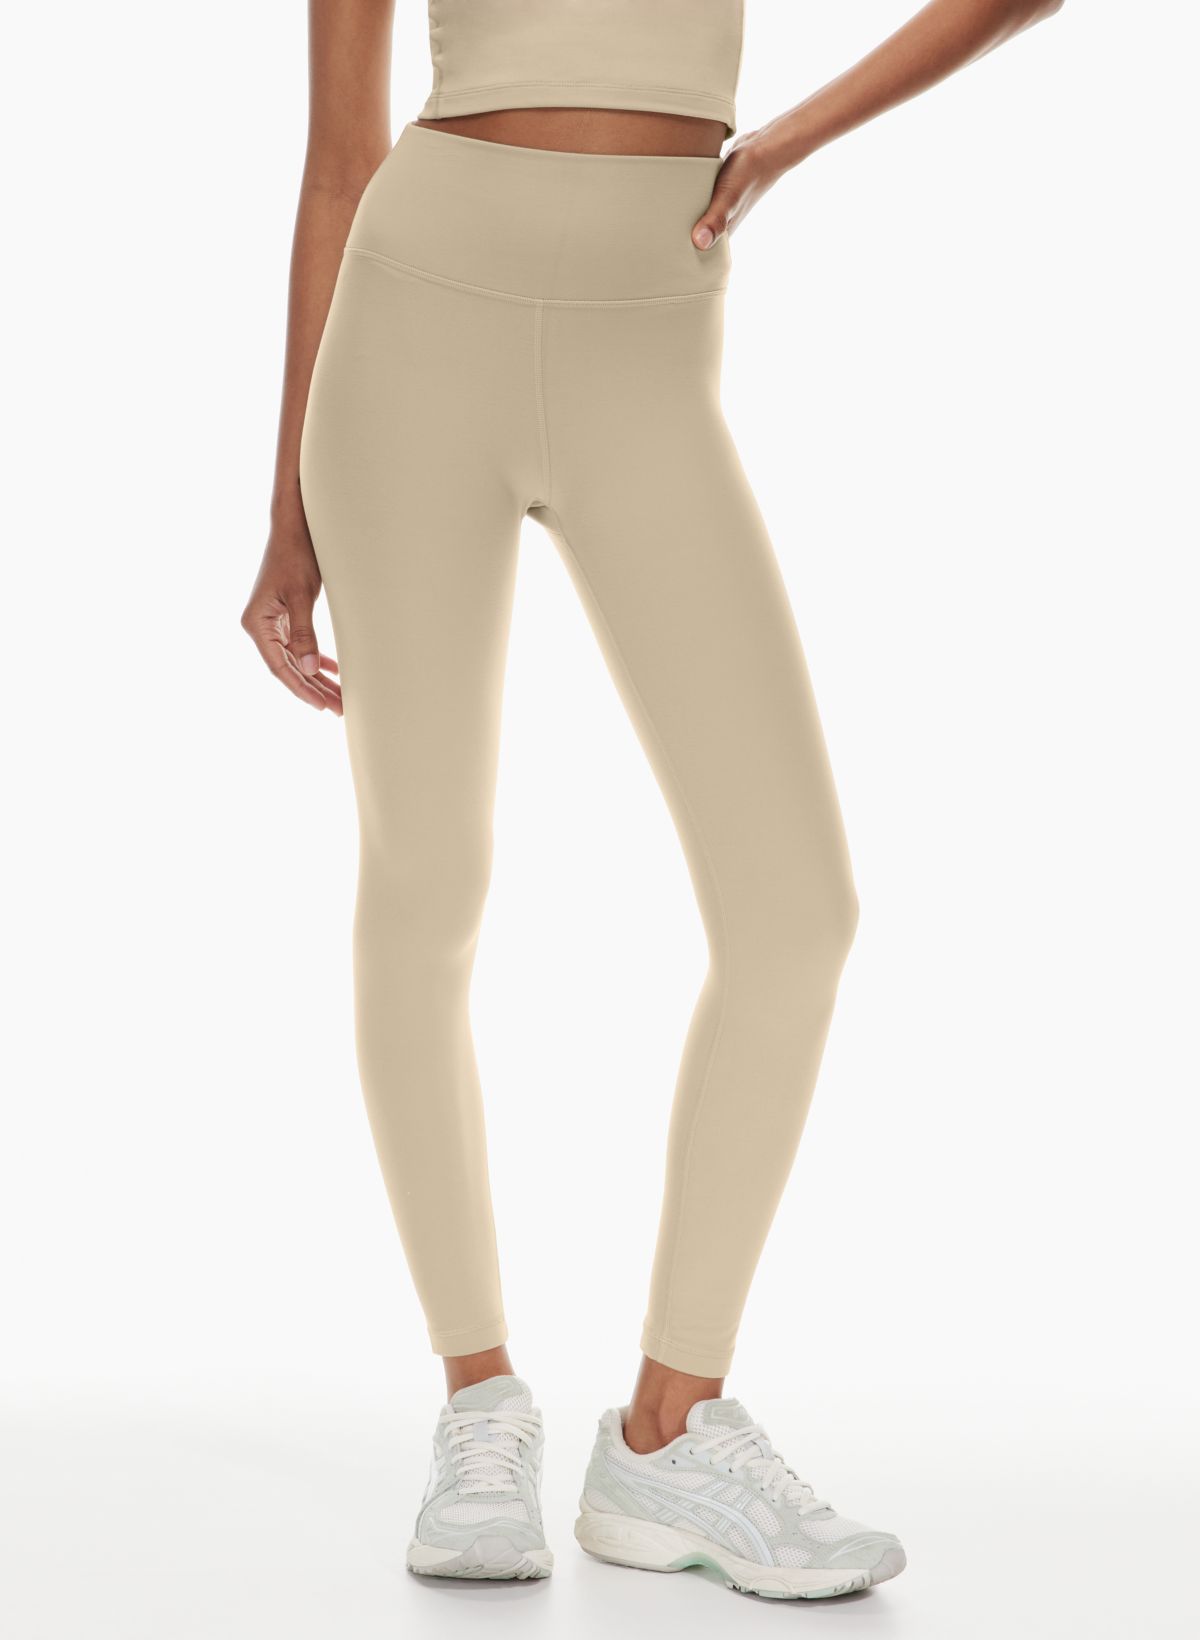 AnyBody Washed Ribbed Leggings with Cinched Detail Dark Taupe XL